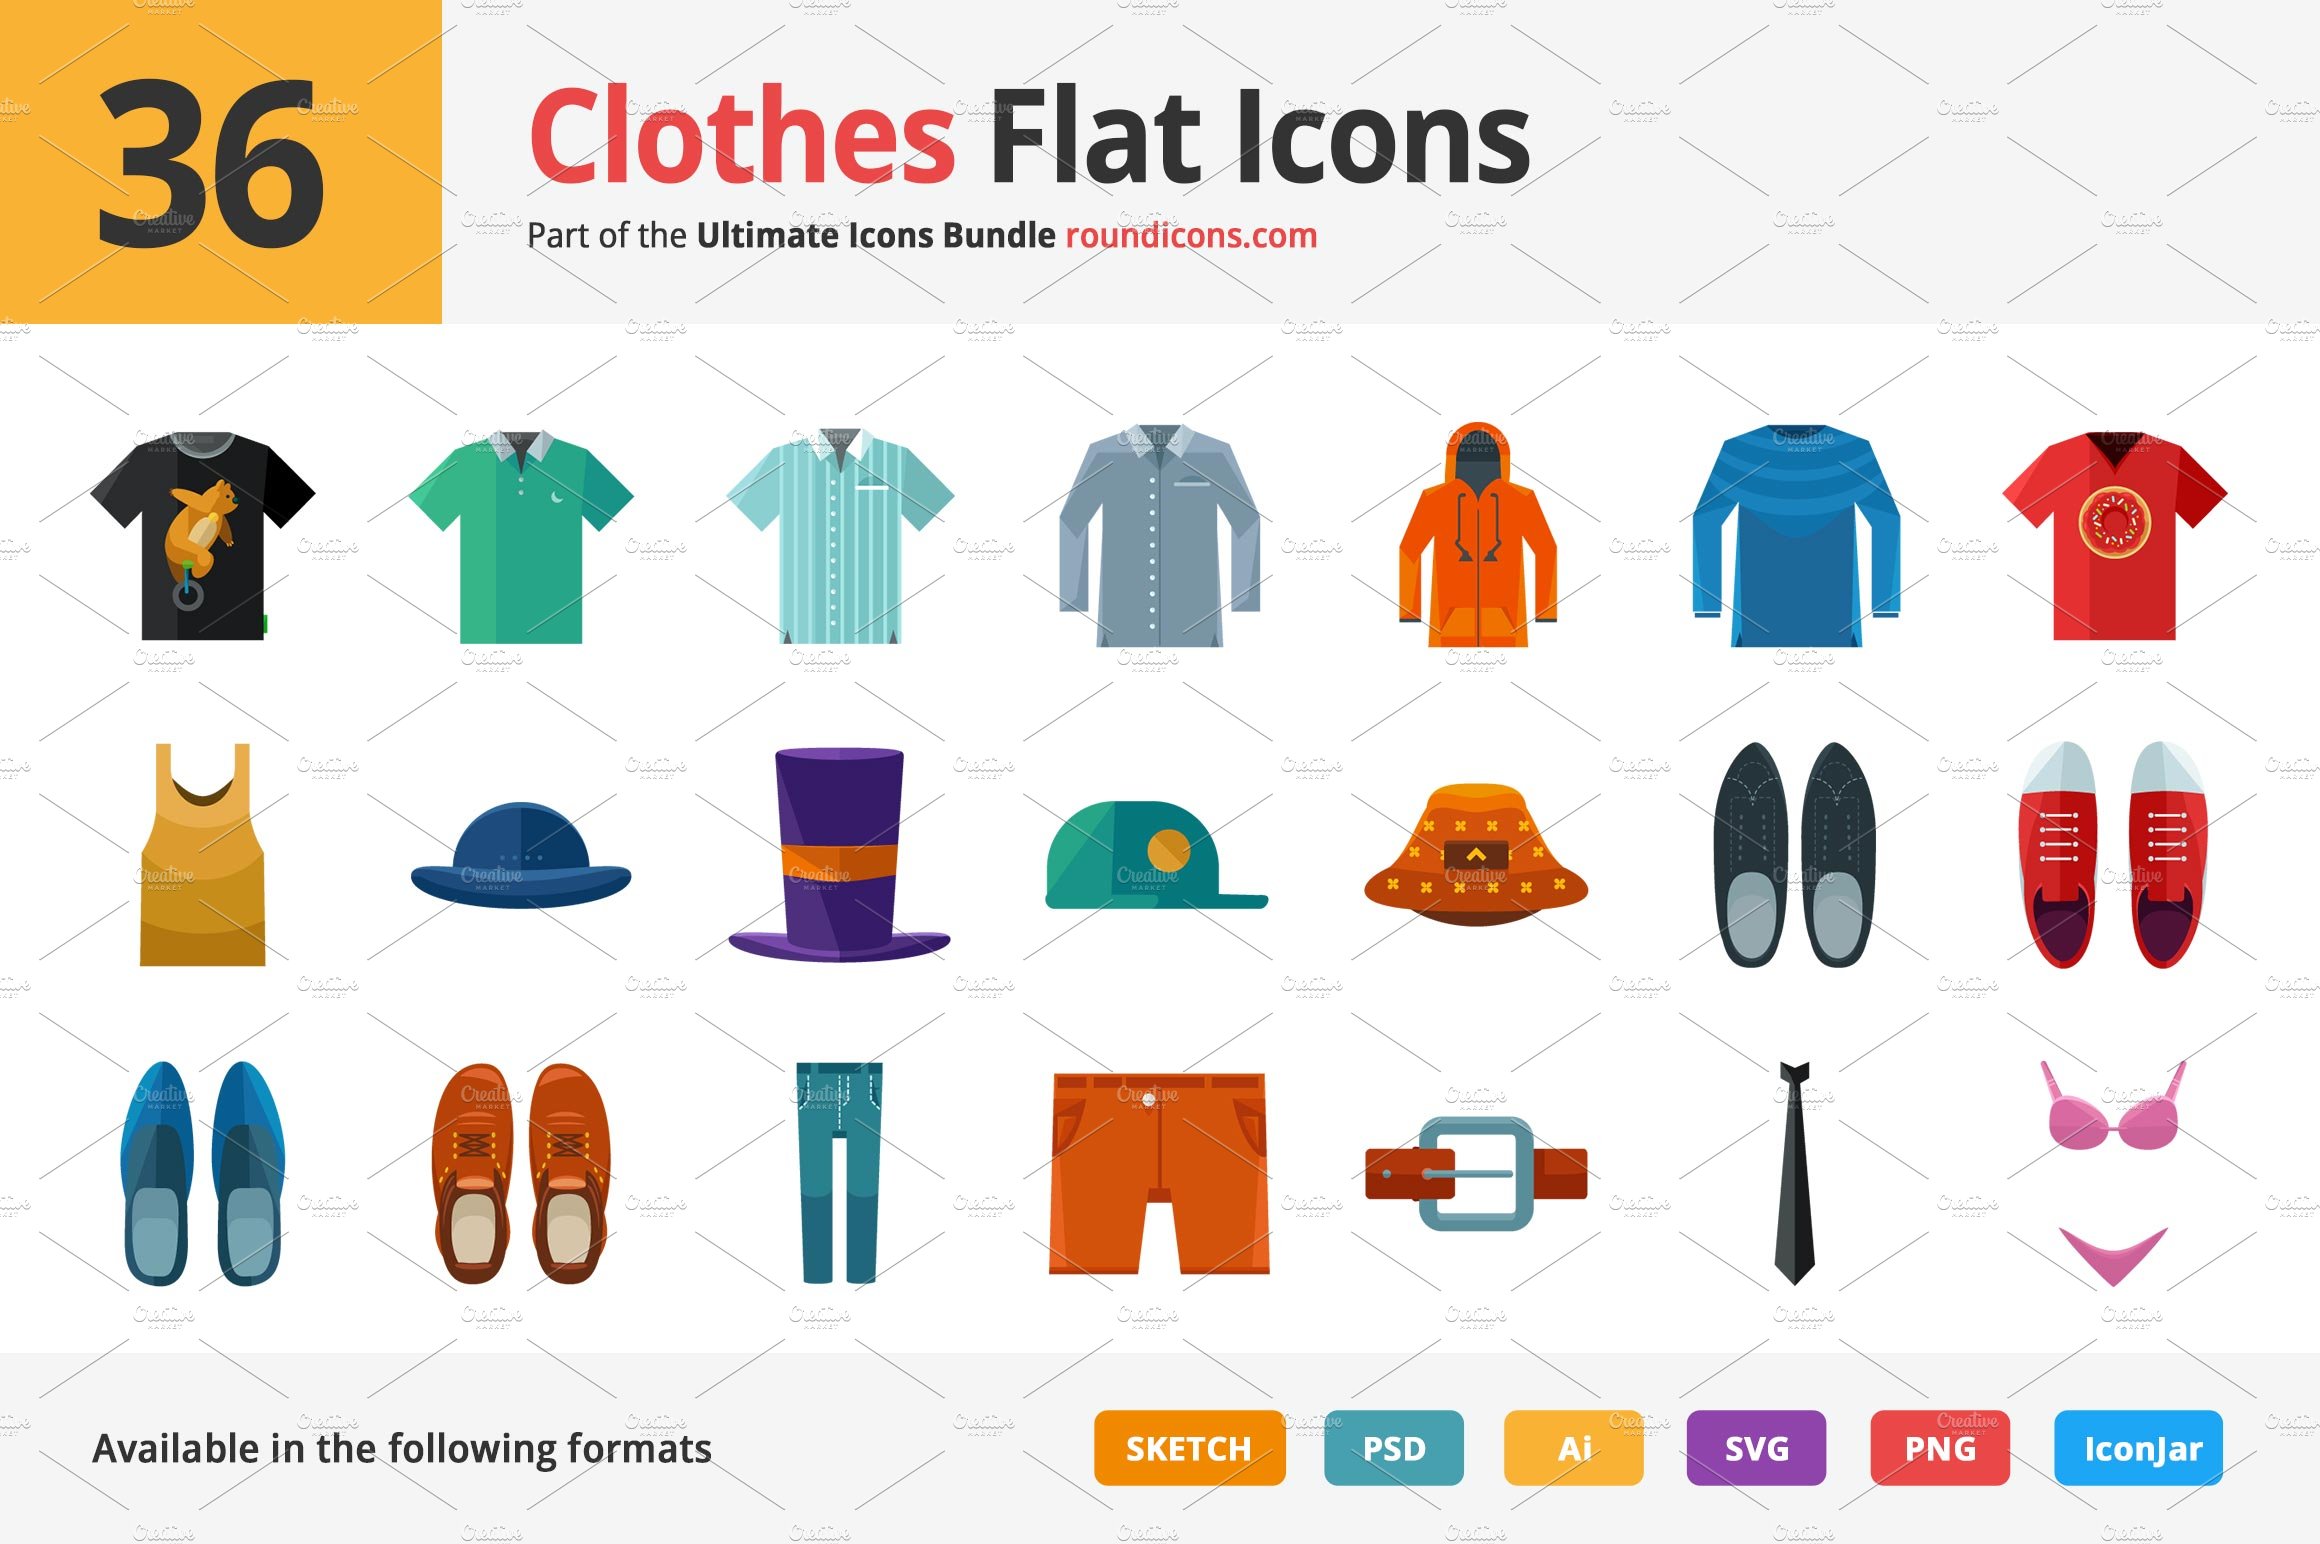 36 Clothes Flat Icons cover image.